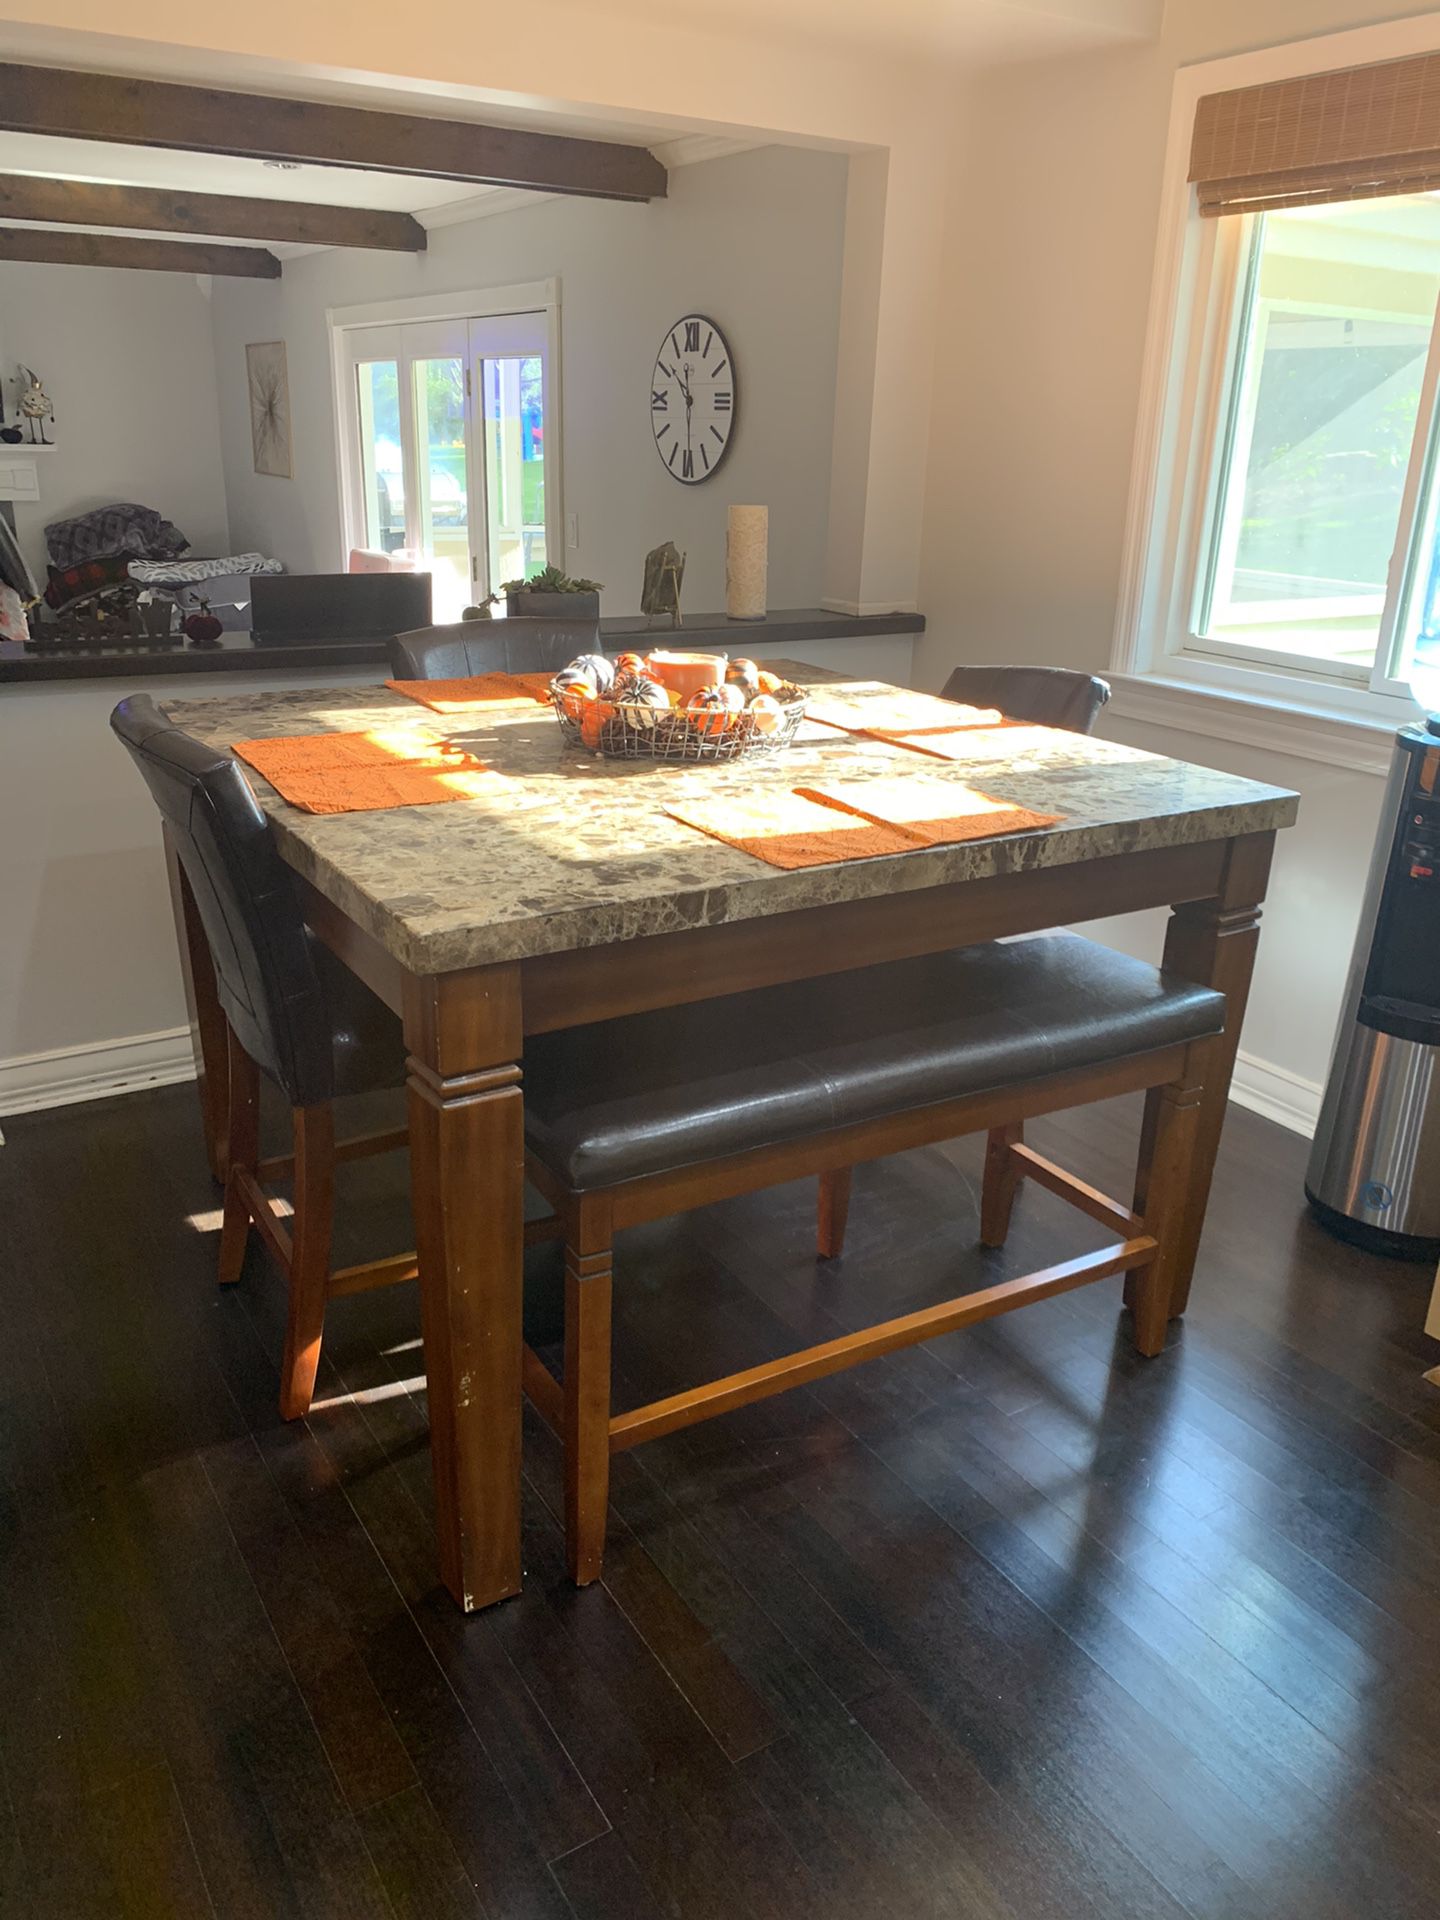 Kitchen table with bench and chairs